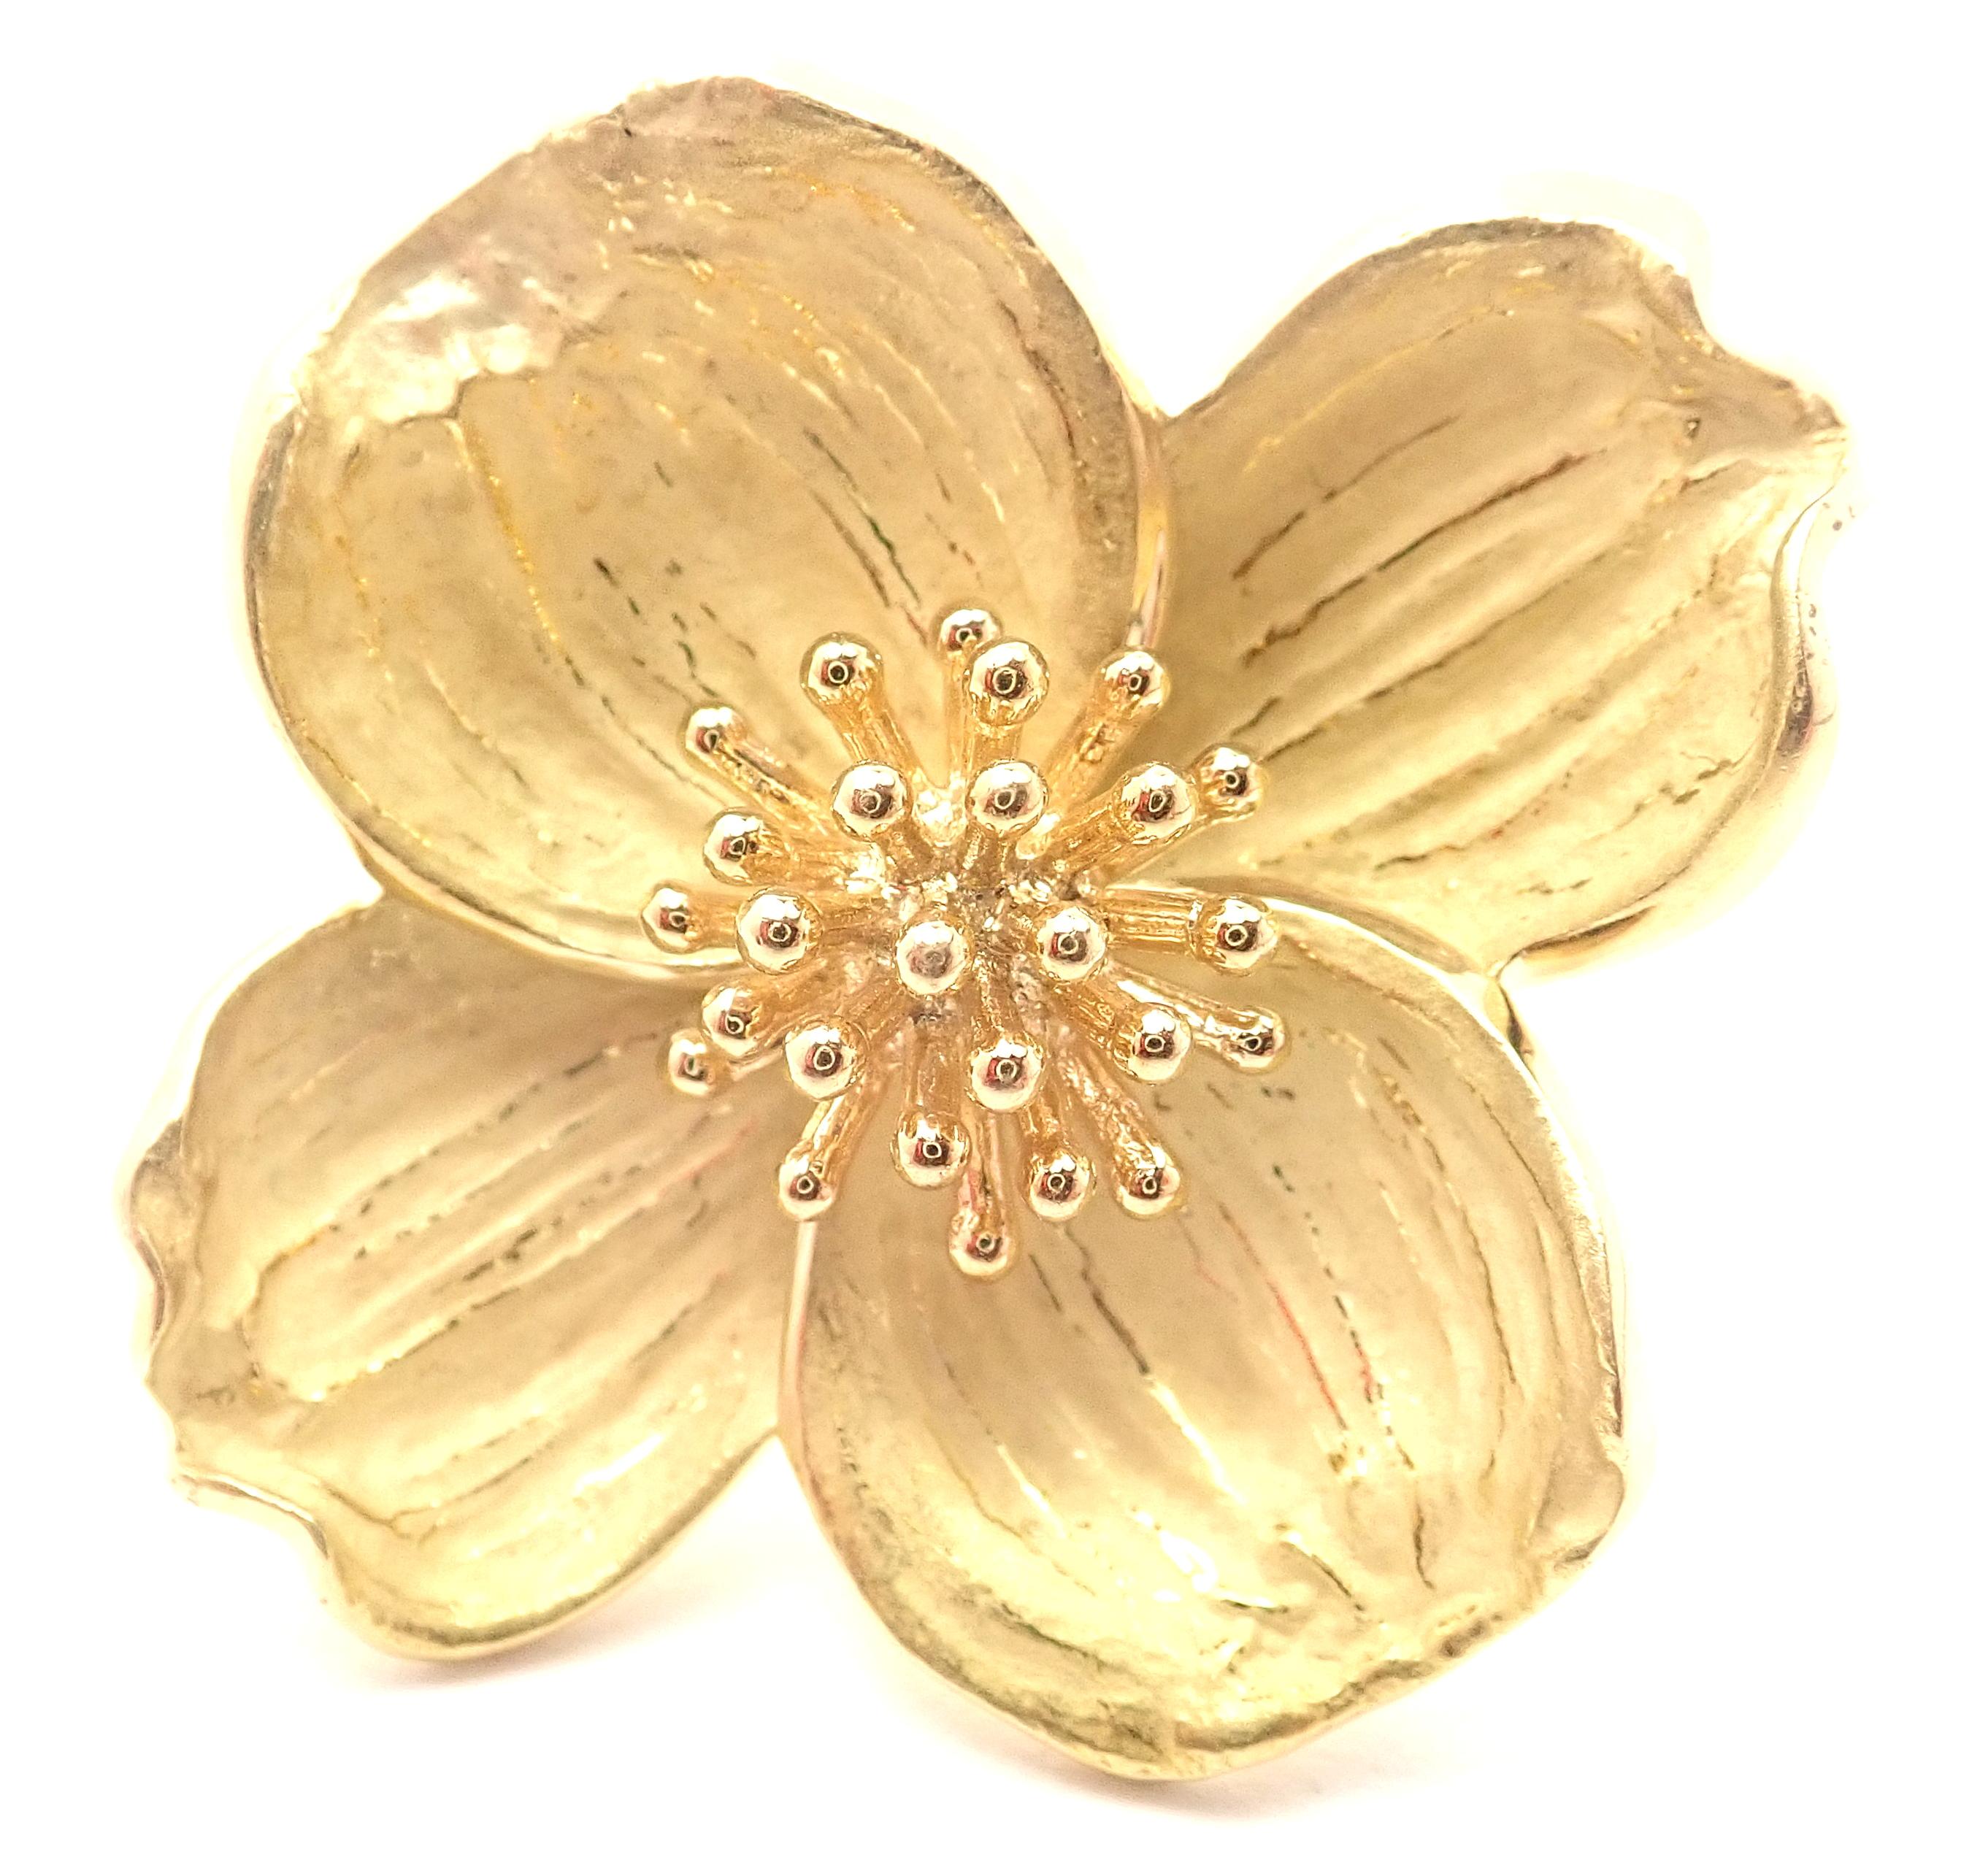 18k Yellow Gold Dogwood Flower Vintage Brooch by Tiffany & Co.
Details: 
Measurements: 34mm x 37mm 
Weight: 20.1 grams
Stamped Hallmarks: Tiffany & Co 750 
*Free Shipping within the United States*
YOUR PRICE: $3,000
T2888mlle